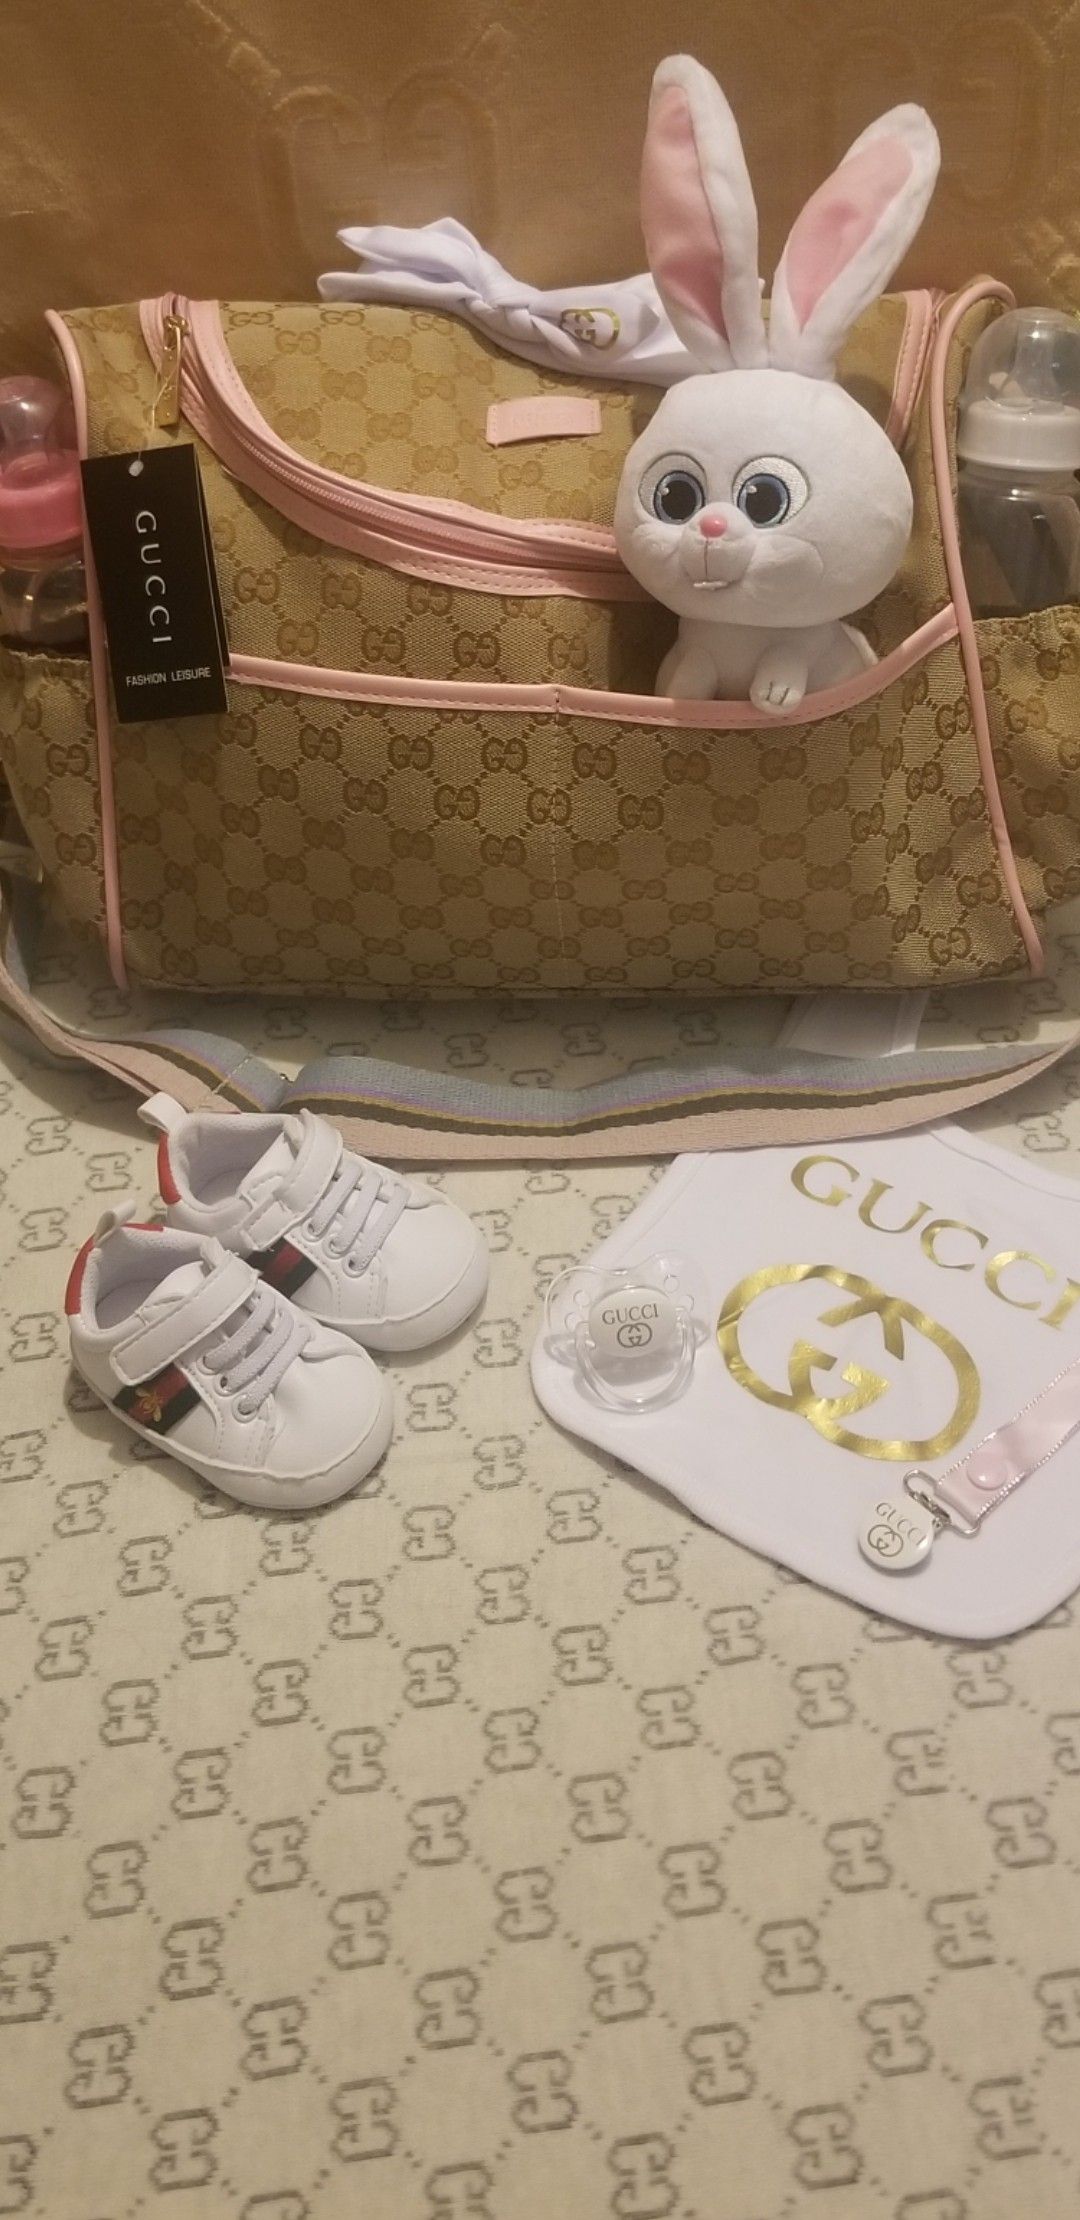 DESIGNER DIAPER BAG - WITH MATCHING BABY SHOES!